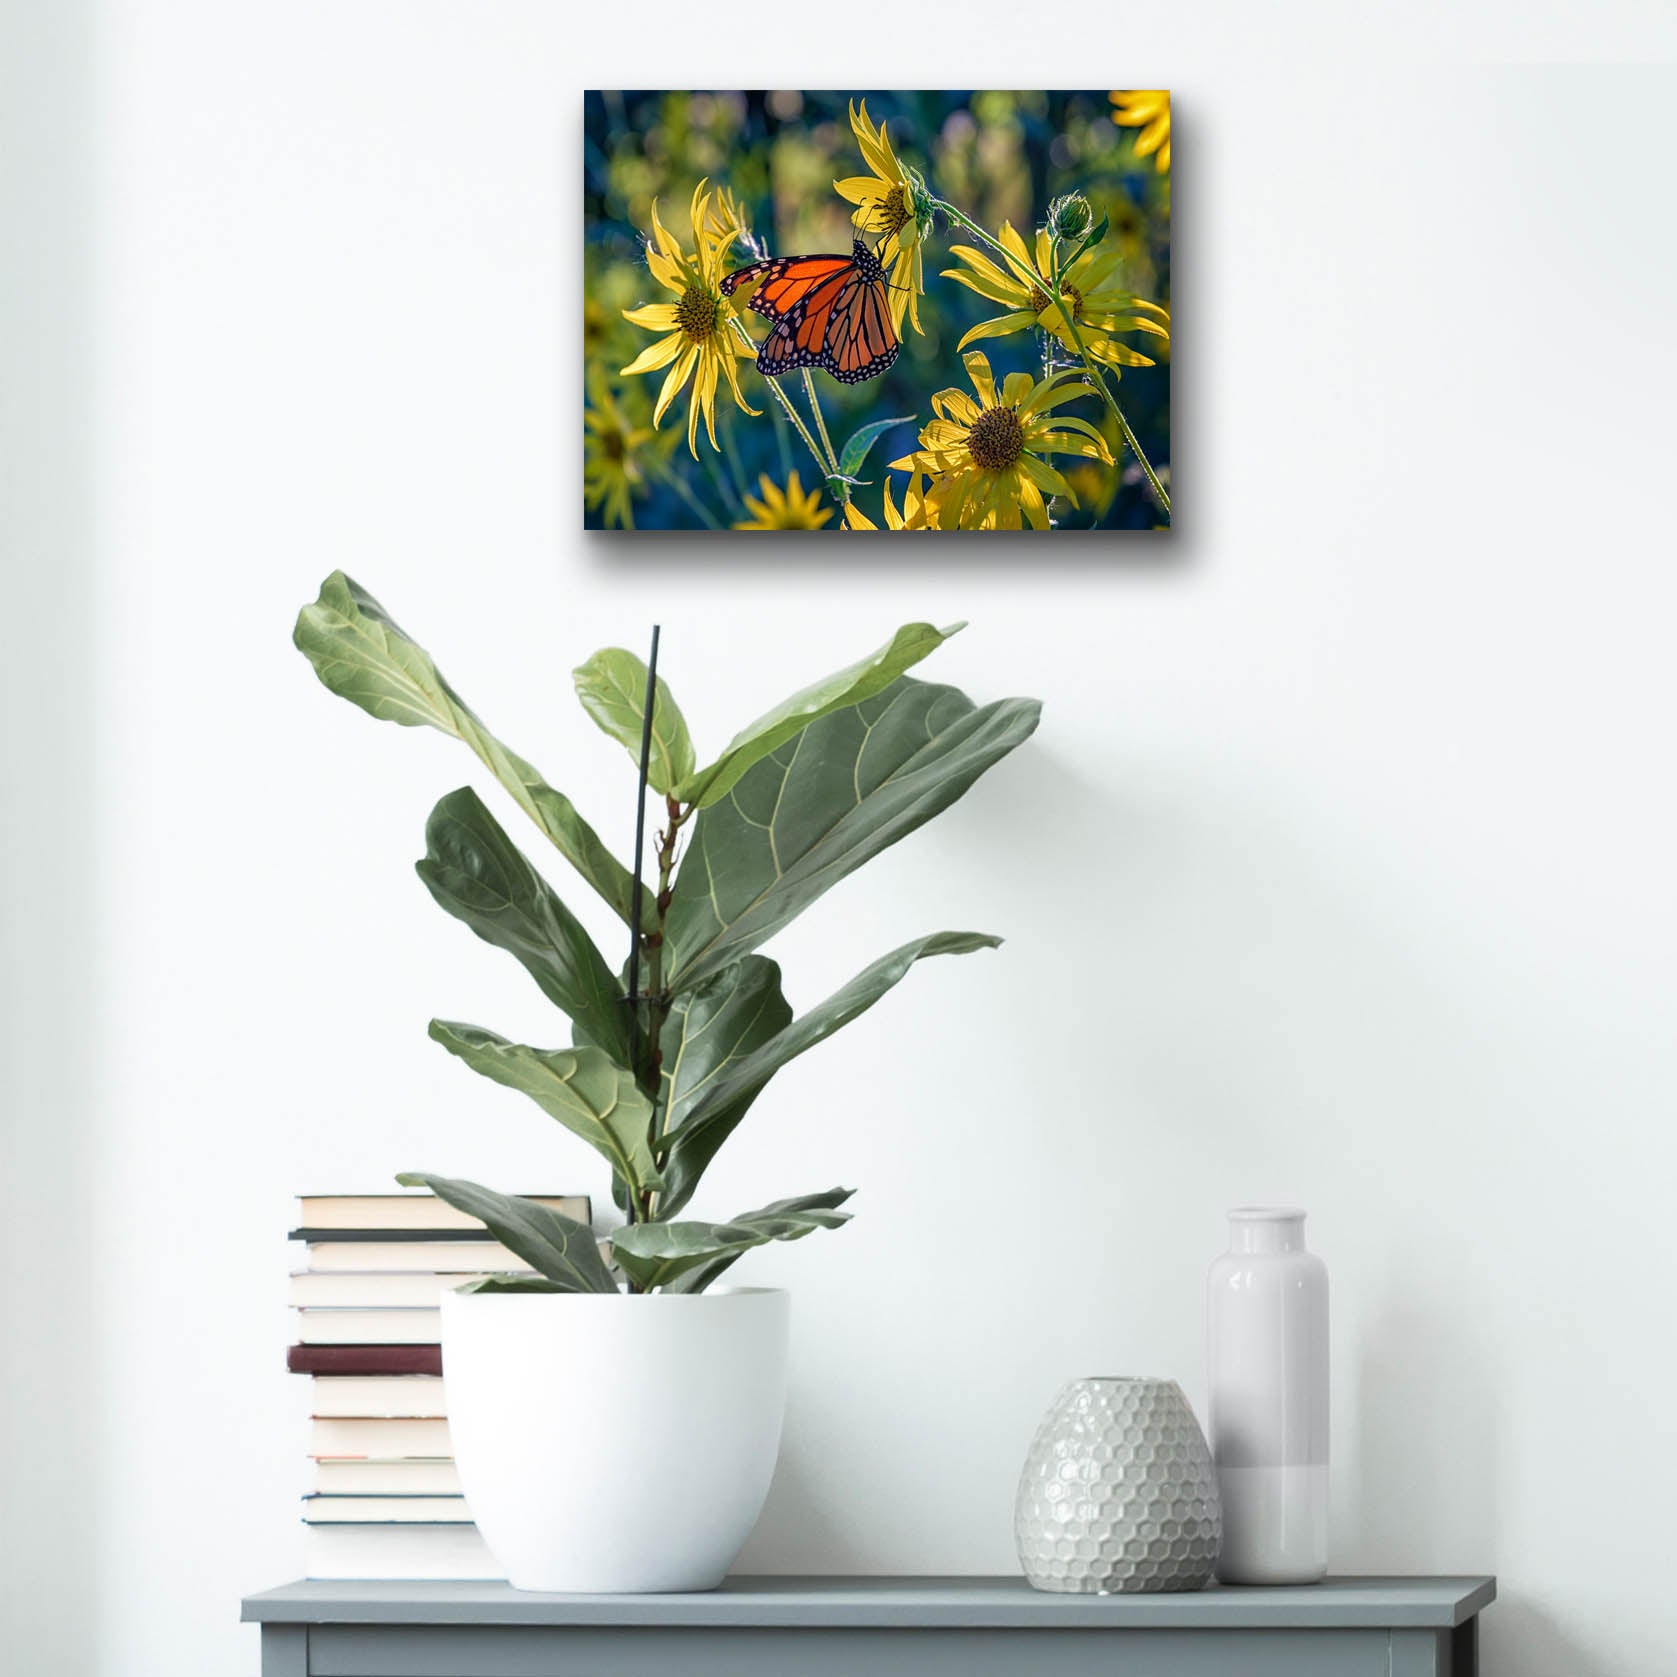 Epic Art 'The Monarch and the Sunflower' by Rick Berk, Acrylic Glass Wall Art,16x12